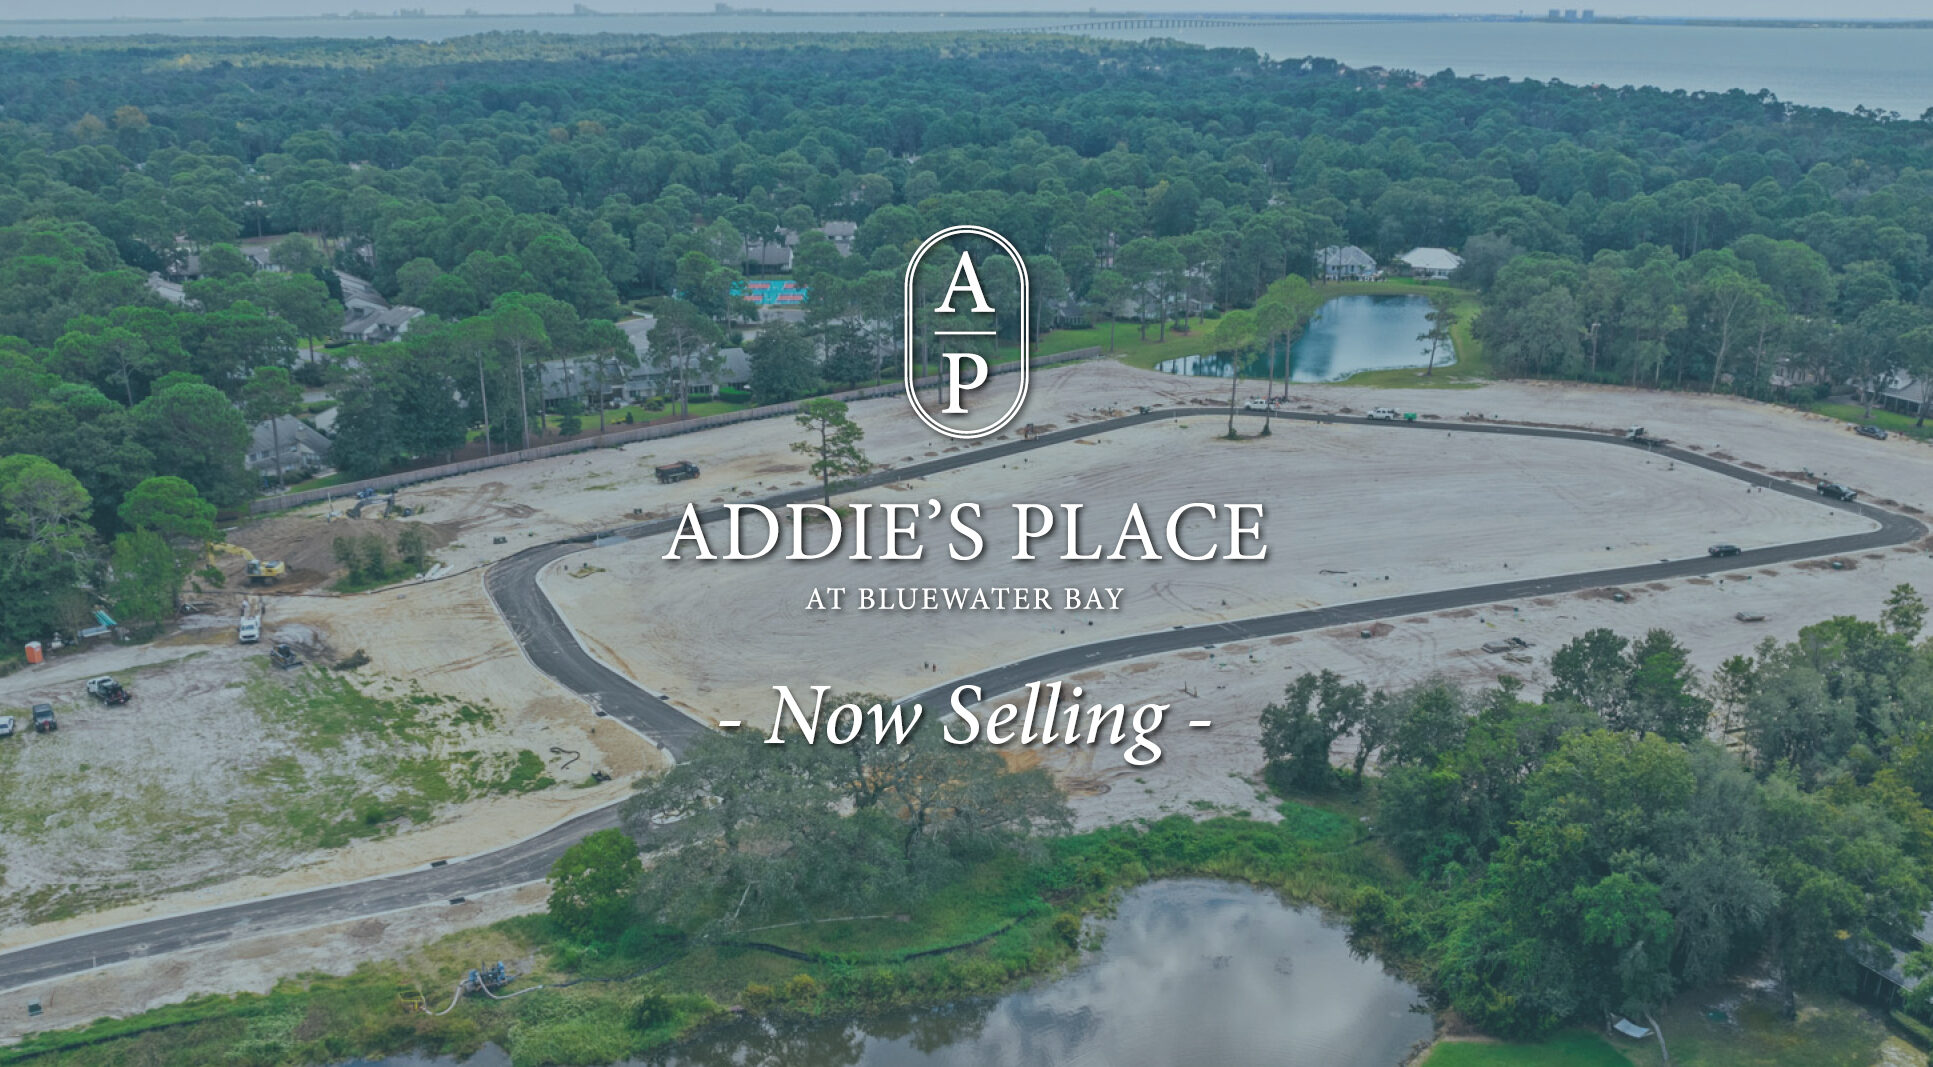 Now Selling - Addie's Place